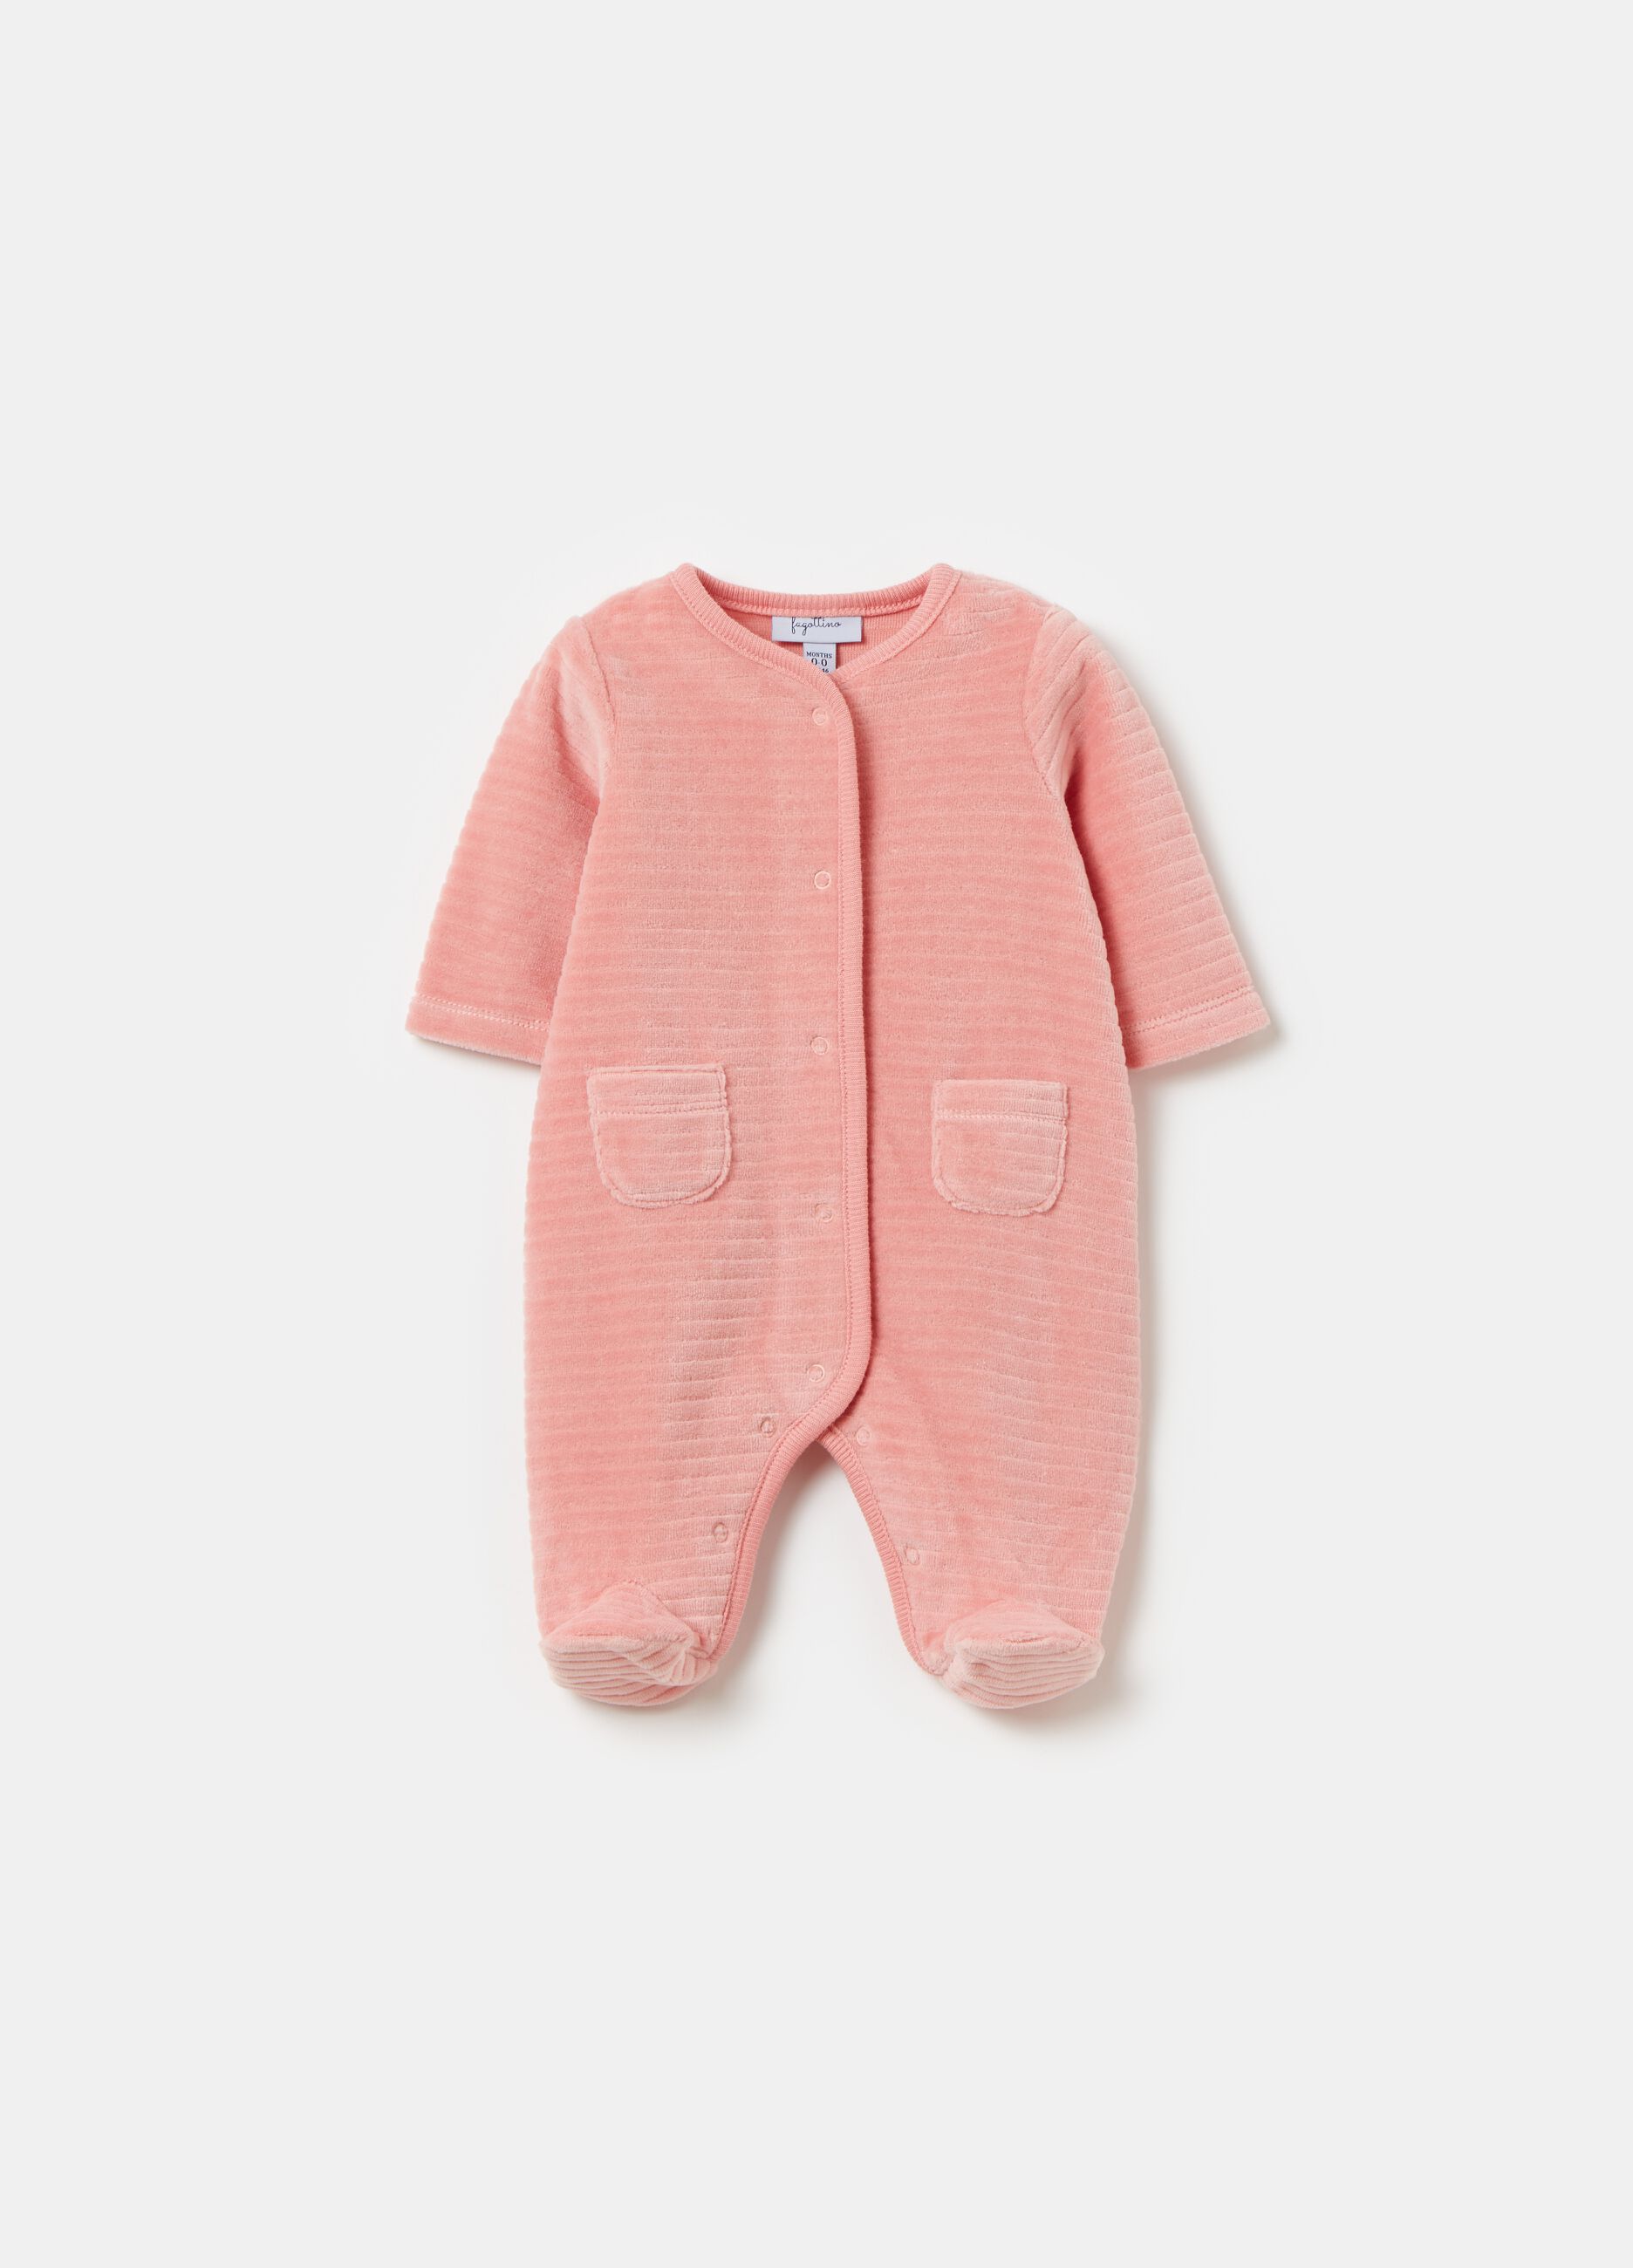 Onesie with feet and striped weave